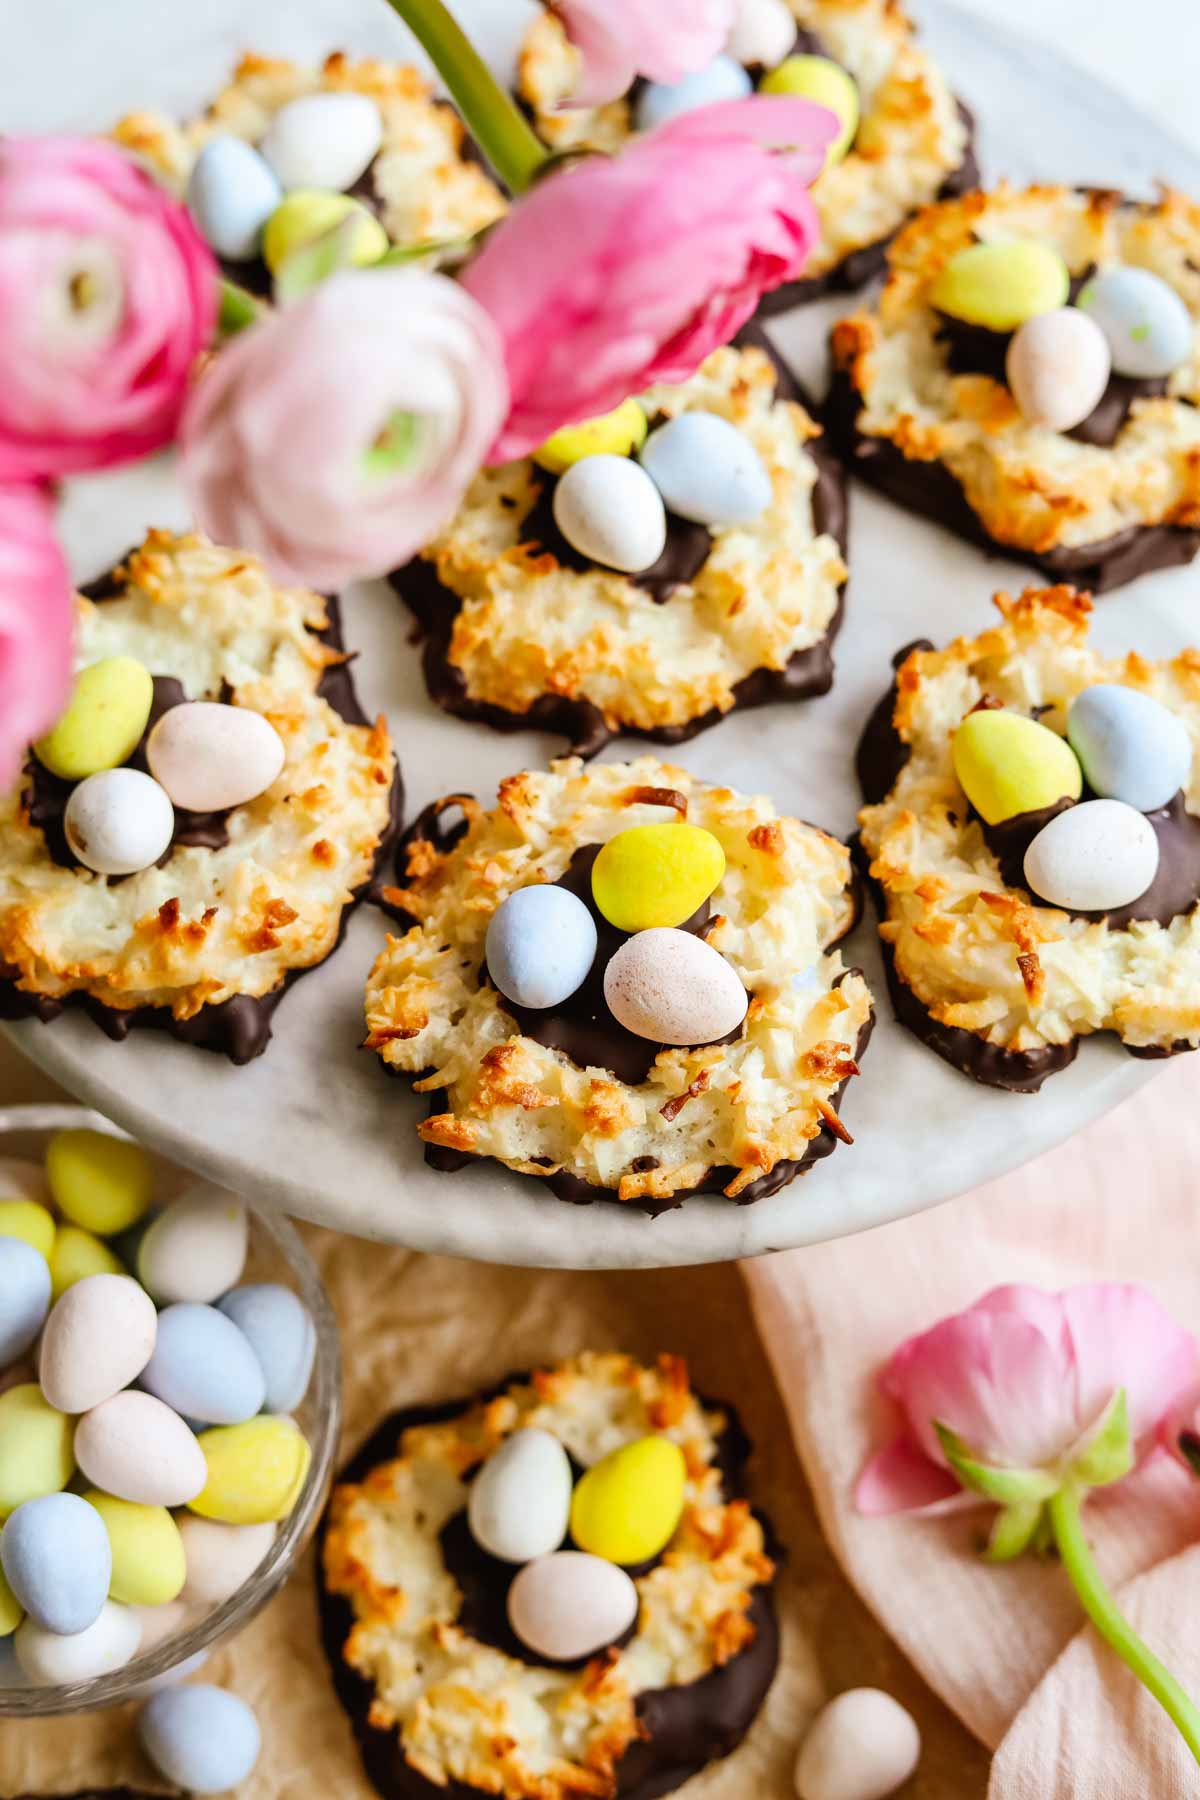 Chocolate-covered coconut macaroon nests with Cadbury mini eggs arranged on a marble platter with light and dark pink ranunculus flowers.